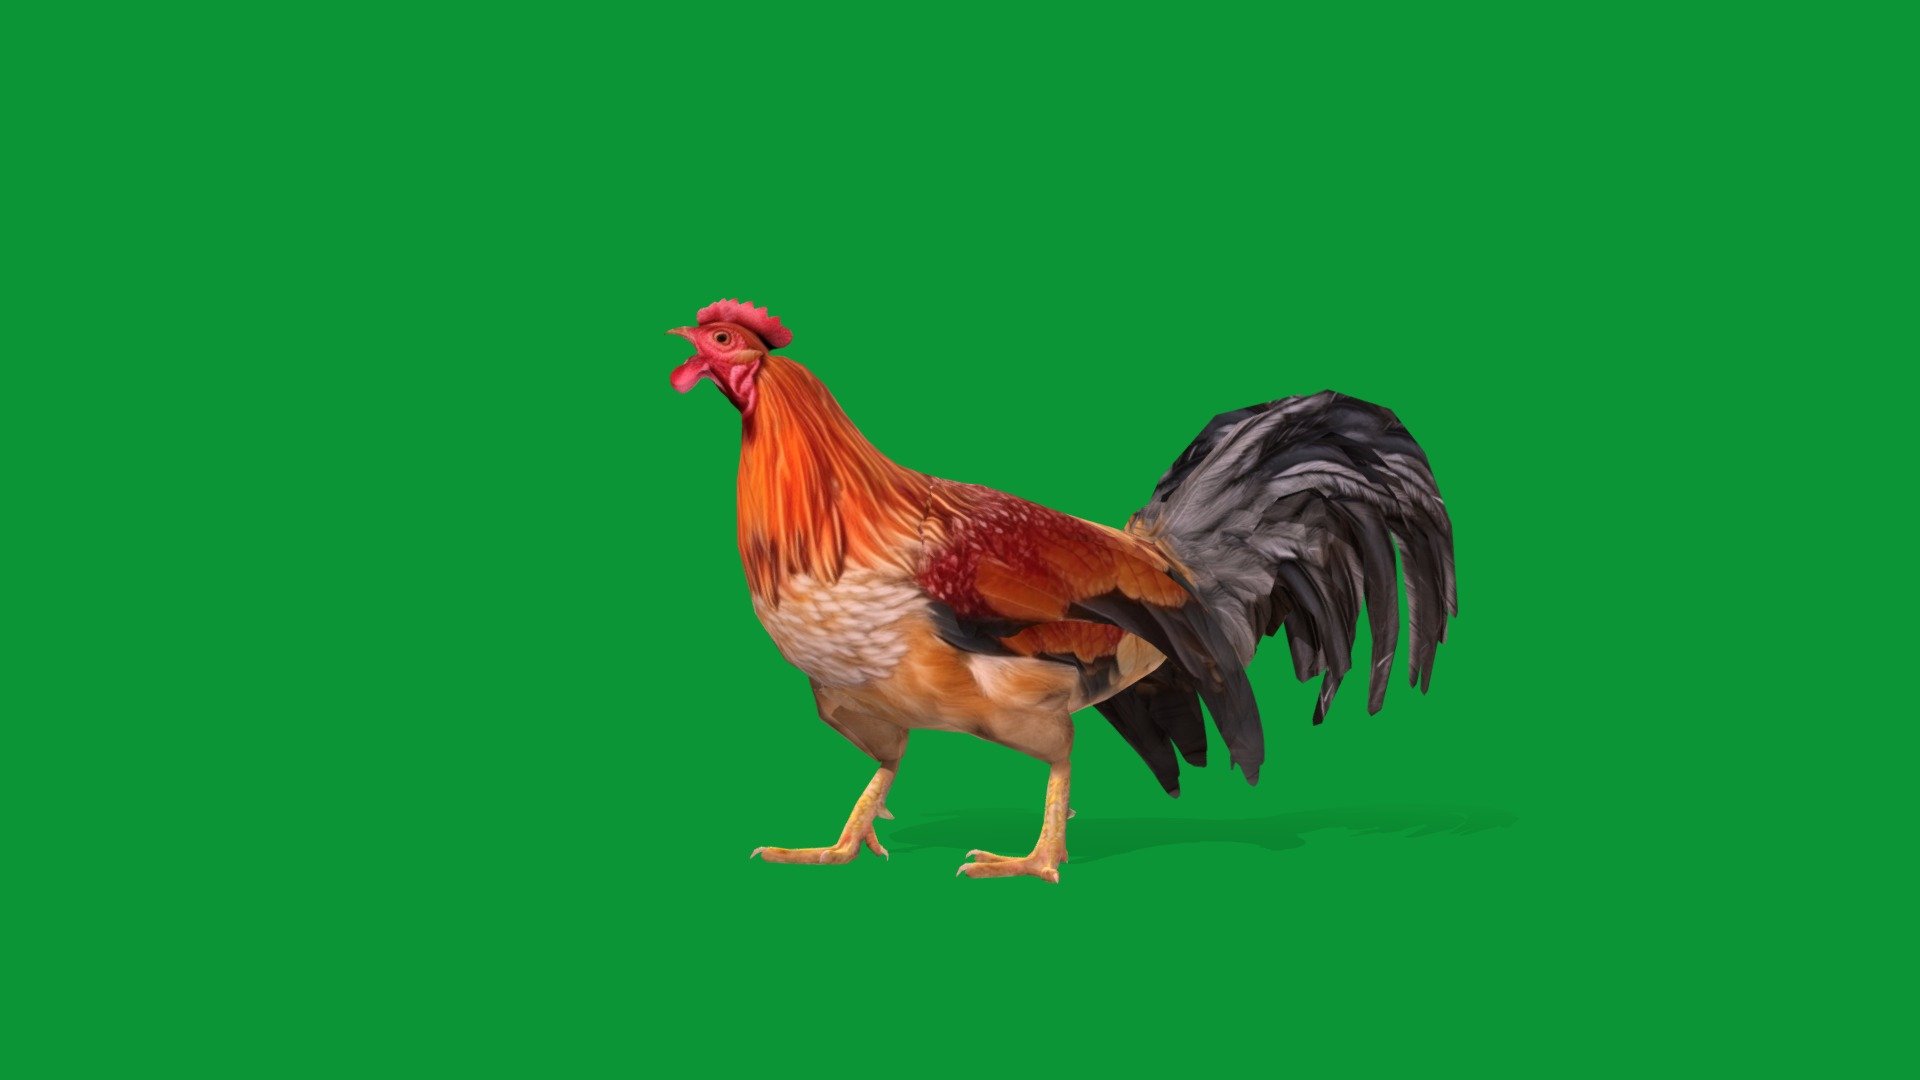 Male Chicken (Rooster)Junglefowl

Gallus gallus domesticus Animal Bird(Domesticated)Pet,Farm Animals,Livestock 

1 Draw Calls

LowPoly

Game Ready (Character)

Subdivision Surface Ready

12-Animations 

4K PBR Textures 1 Material

Unreal/Unity FBX 

Blend File 3.6.5 LTS / 4 Plus

USDZ File (AR Ready). Real Scale Dimension (Xcode ,Reality Composer, Keynote Ready)

Textures Files

GLB File (Unreal 5.1 Plus Native Support,Godot)

Gltf File ( Spark AR, Lens Studio(SnapChat),Effector(Tiktok),Spline,Play Canvas,Omiverse)Compatible

Triangles -7348

Faces -4567

Edges -8627

Vertices -4100

Diffuse, Metallic, Roughness , Normal Map ,Specular Map,AO

A rooster is an adult male chicken,an adult female is called a hen. Roosters are  larger, brighter in color, have larger combs than hens.Synonyms of rooster include: cock, chanticleer, chicken, and barnyard fowl.The chicken is a large and round short-winged bird domesticated from the red junglefowl of Southeast Asia - Male Chicken Rooster (Lowpoly) - Buy Royalty Free 3D model by Nyilonelycompany 3d model